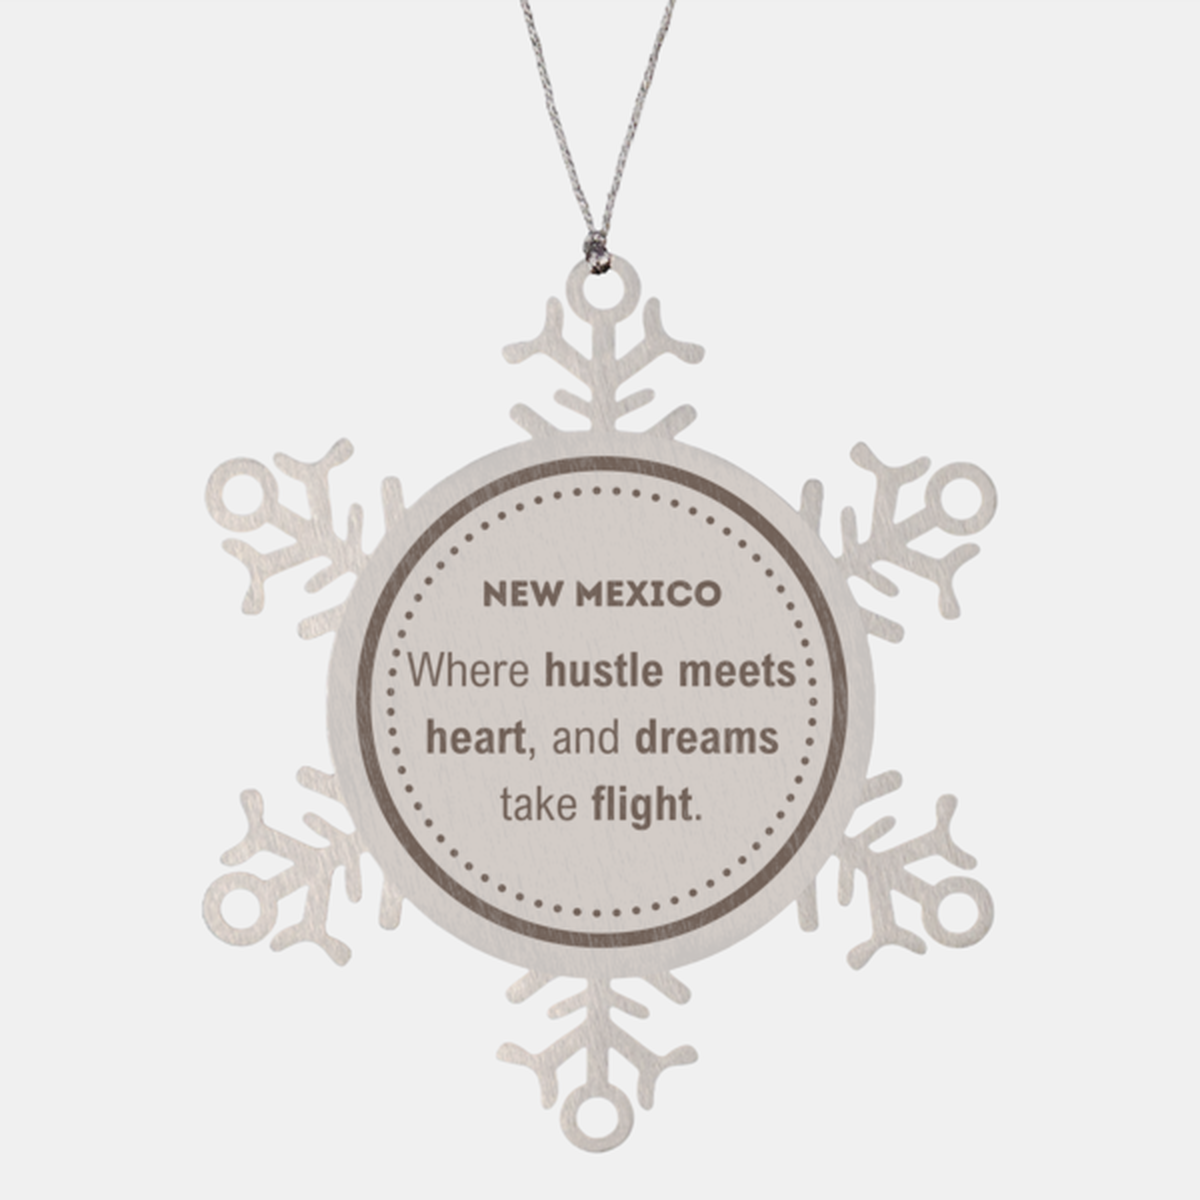 New Mexico: Where hustle meets heart, and dreams take flight, New Mexico Ornament Gifts, Proud New Mexico Christmas New Mexico Snowflake Ornament, New Mexico State People, Men, Women, Friends